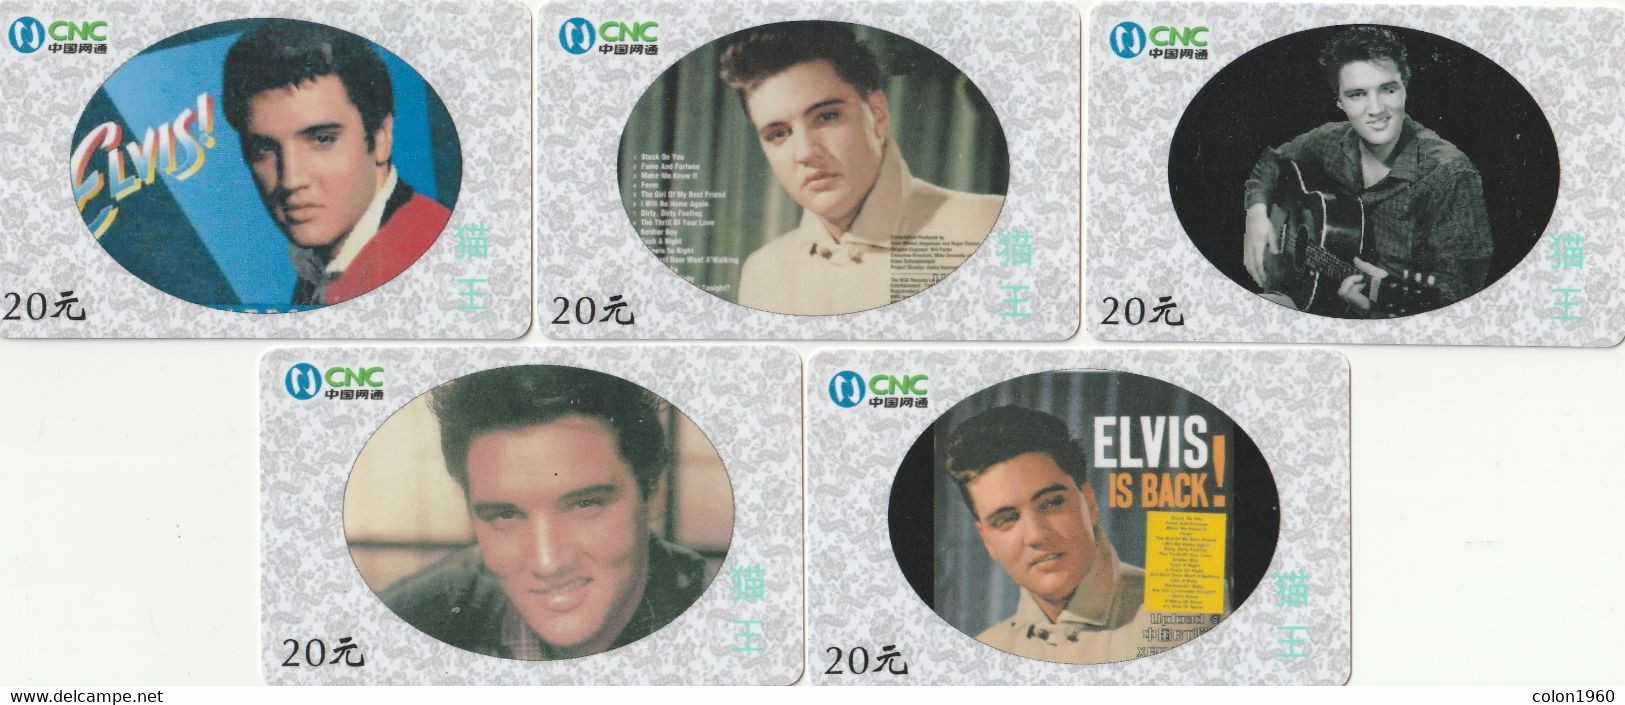 CHINA. ELVIS PRESLEY. SERIE OF 5 CARDS. (020) - Musique